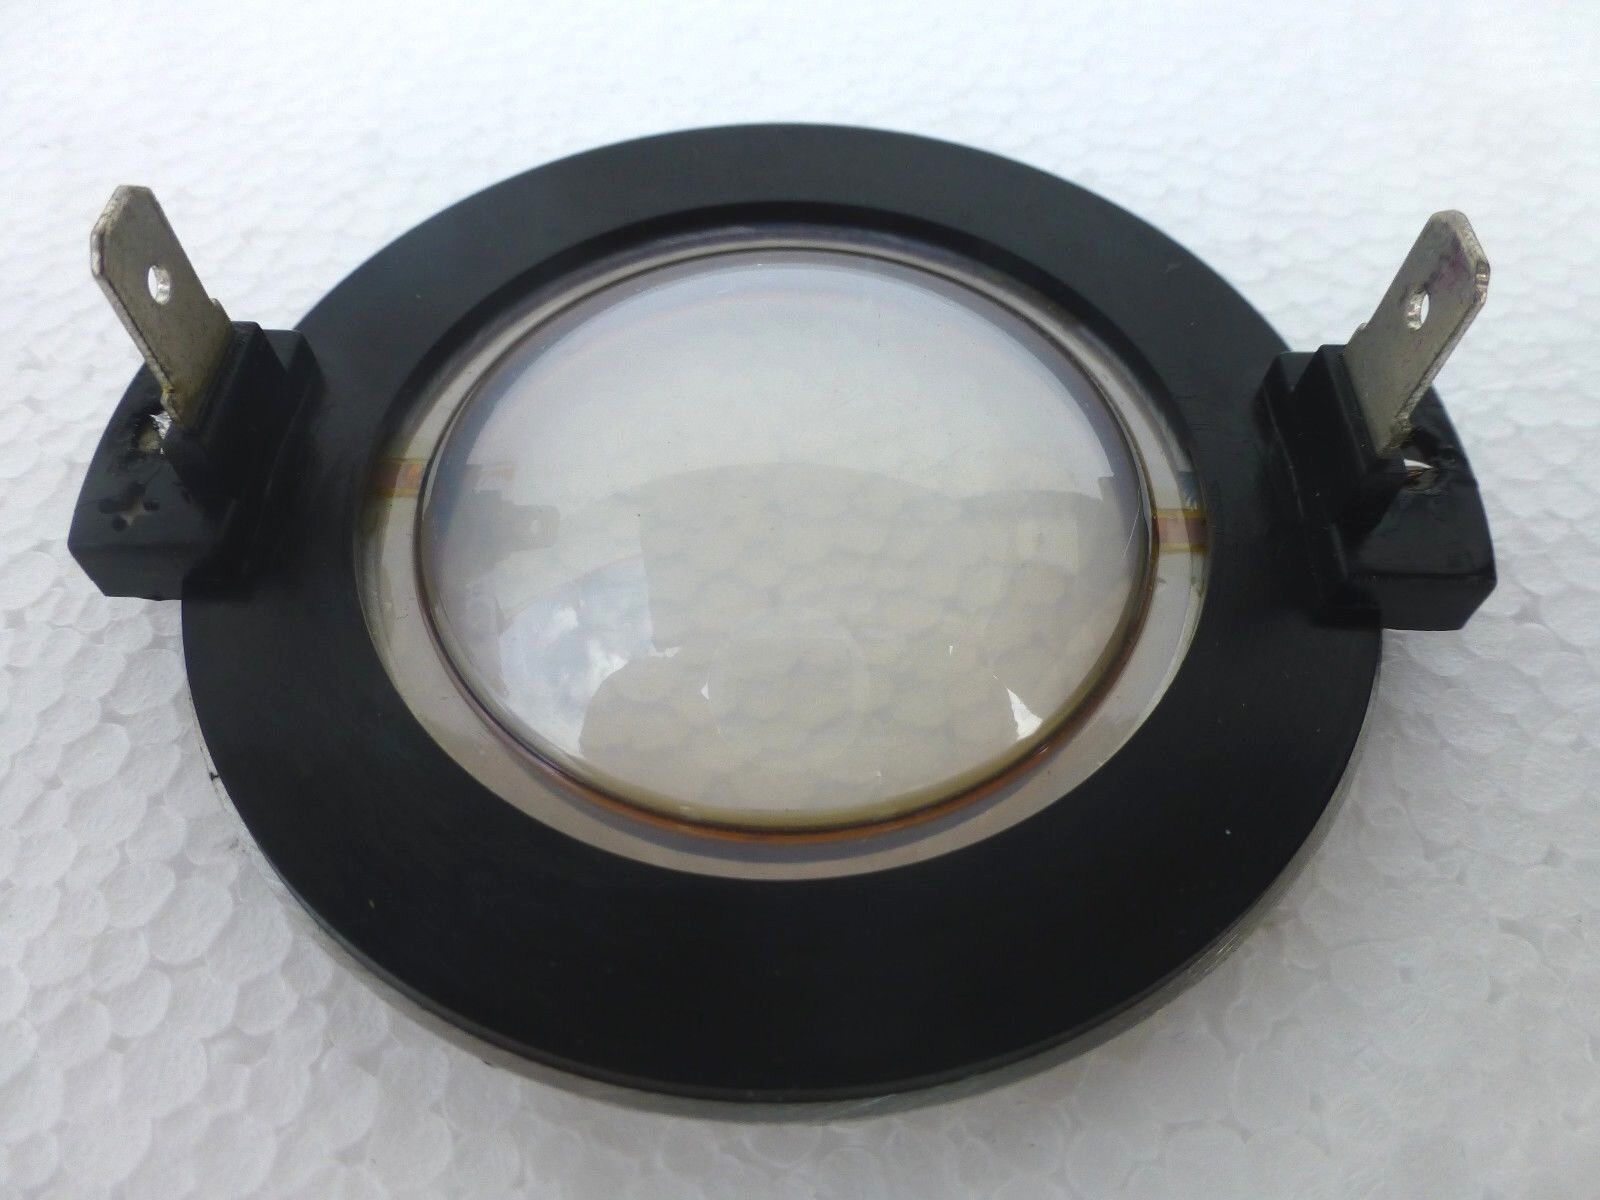 Replacement Diaphragm for RCF ND350 / CD350 Driver, 8 Ohms 44mm